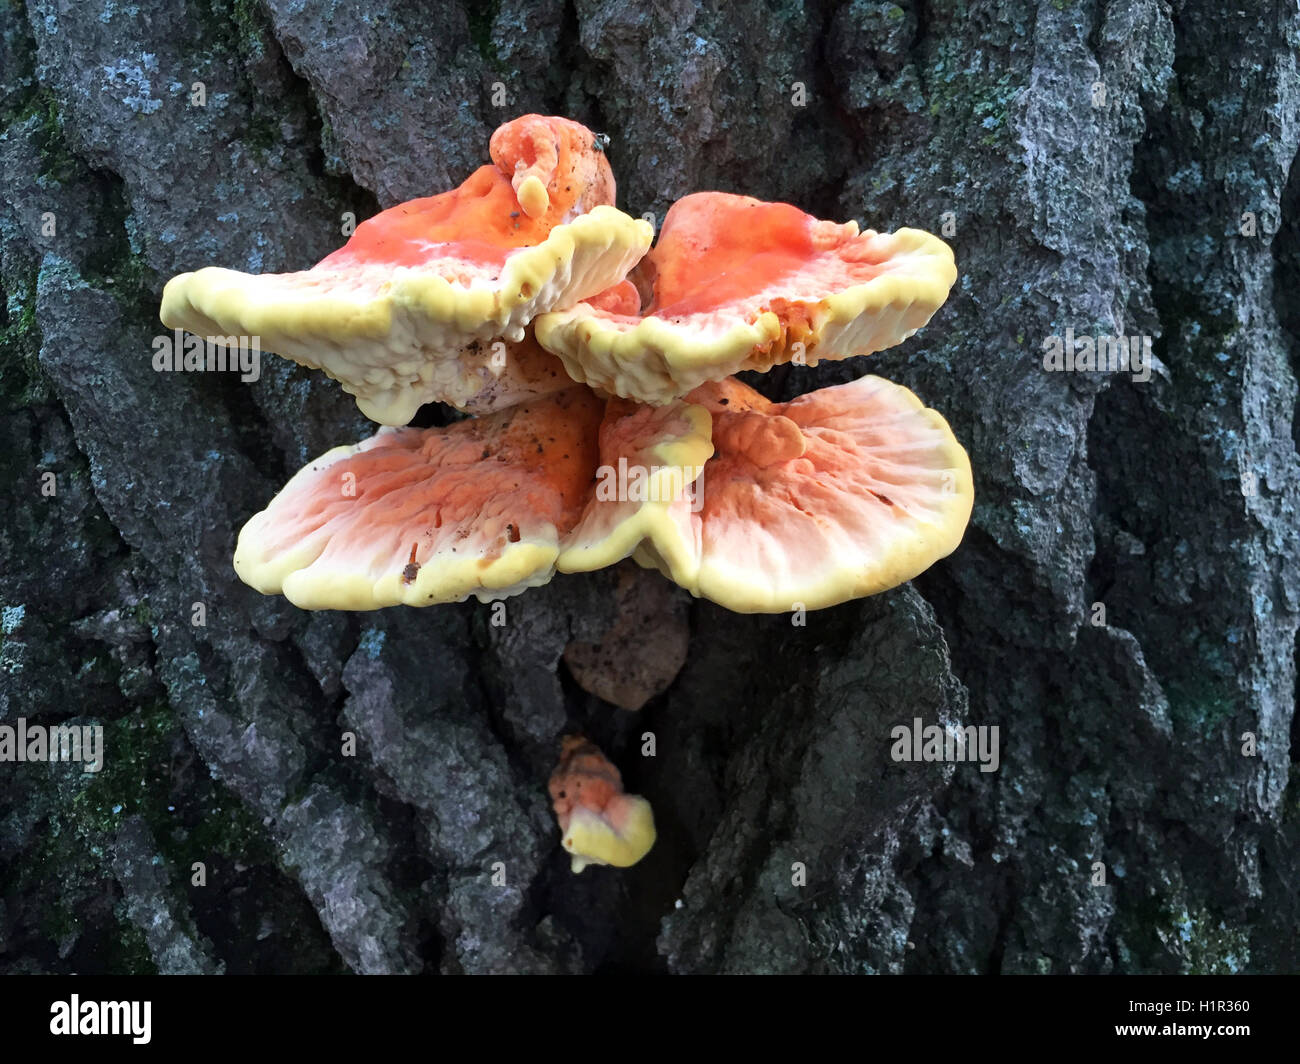 Chicken of the woods mushrooms growing on a tree in the wild Stock Photo